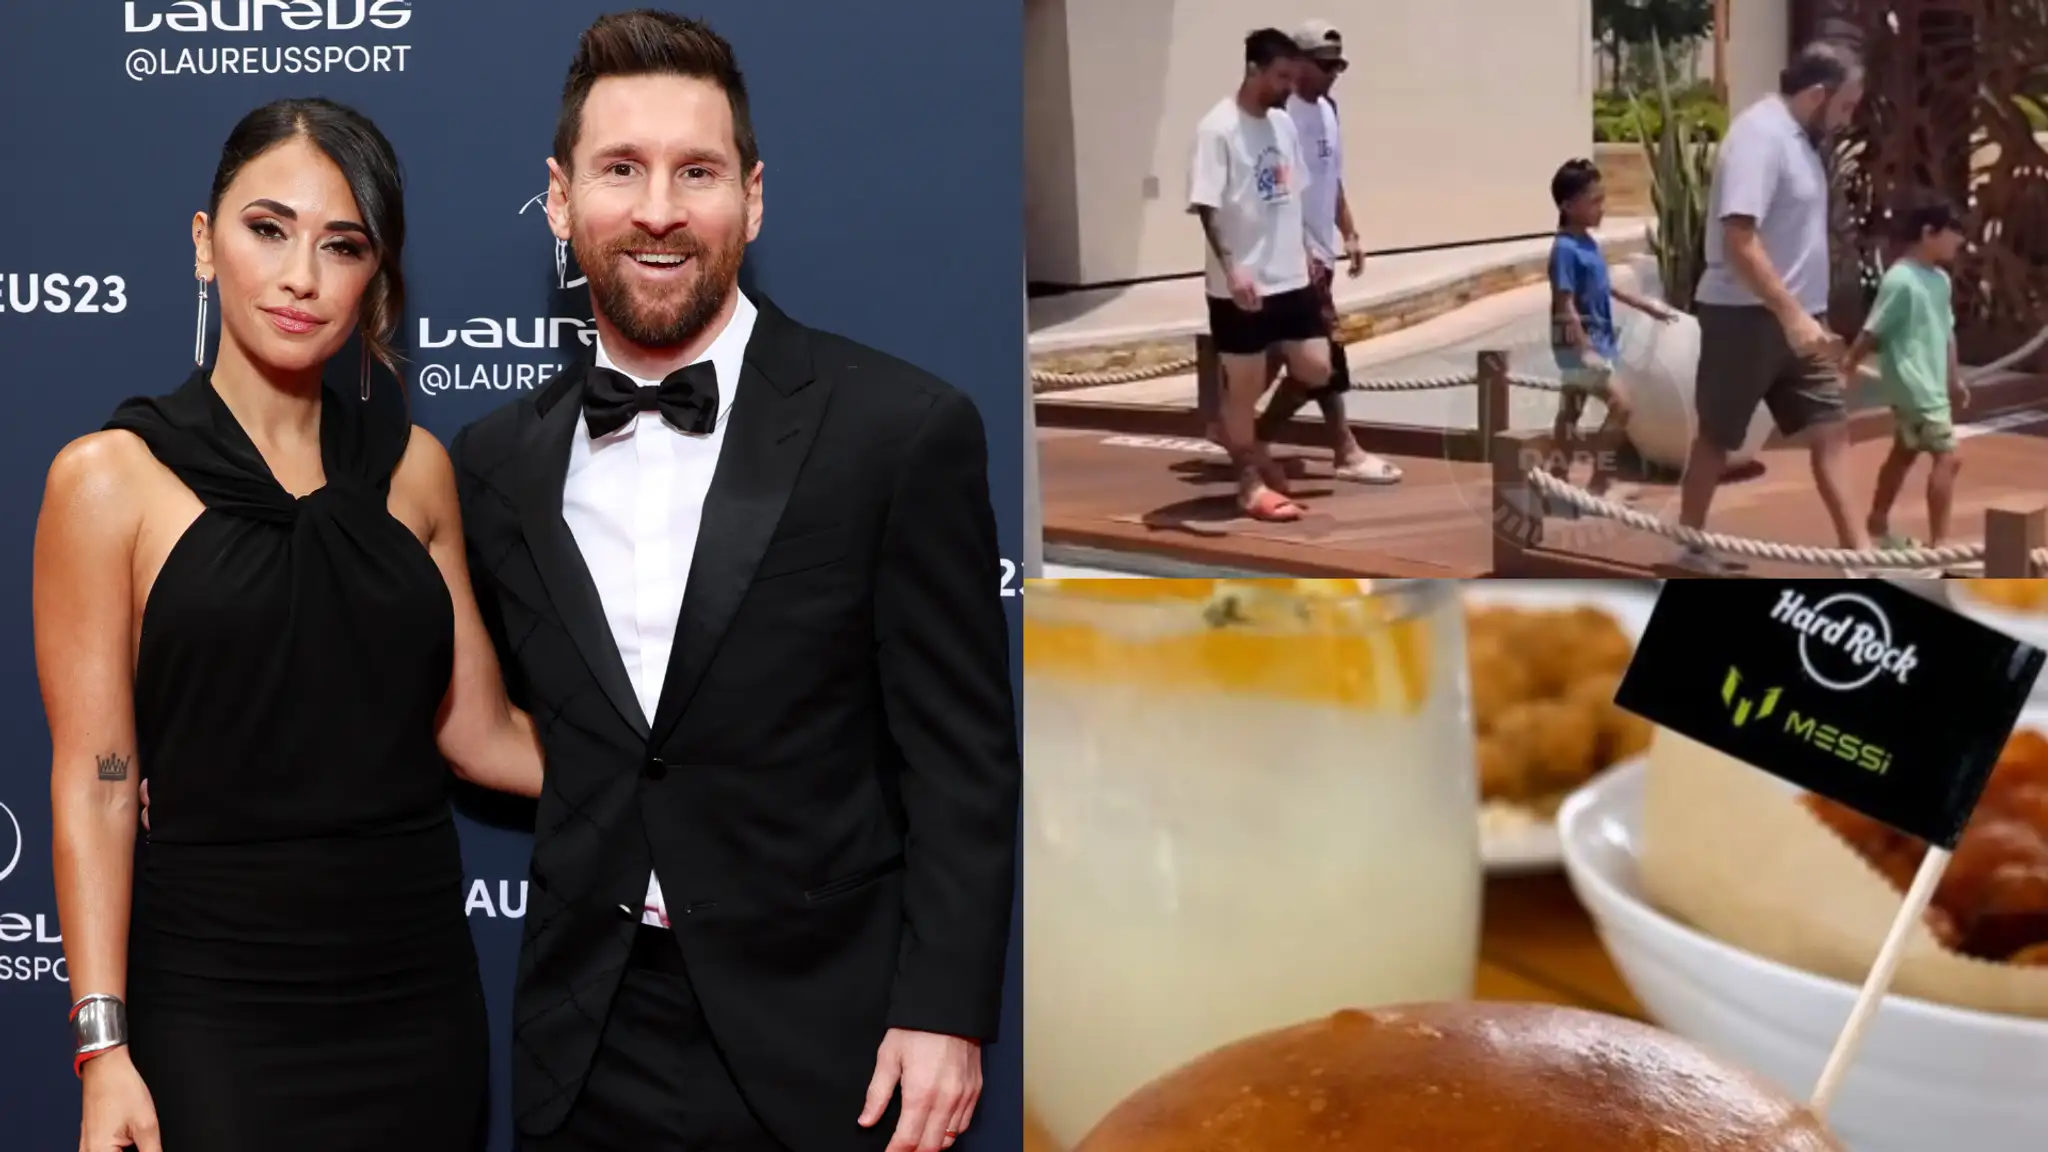 VIDEO: Tasty! Lionel Messi & wife Antonela Roccuzzo head to Hard Rock Cafe to try Inter Miami superstar’s signature burger